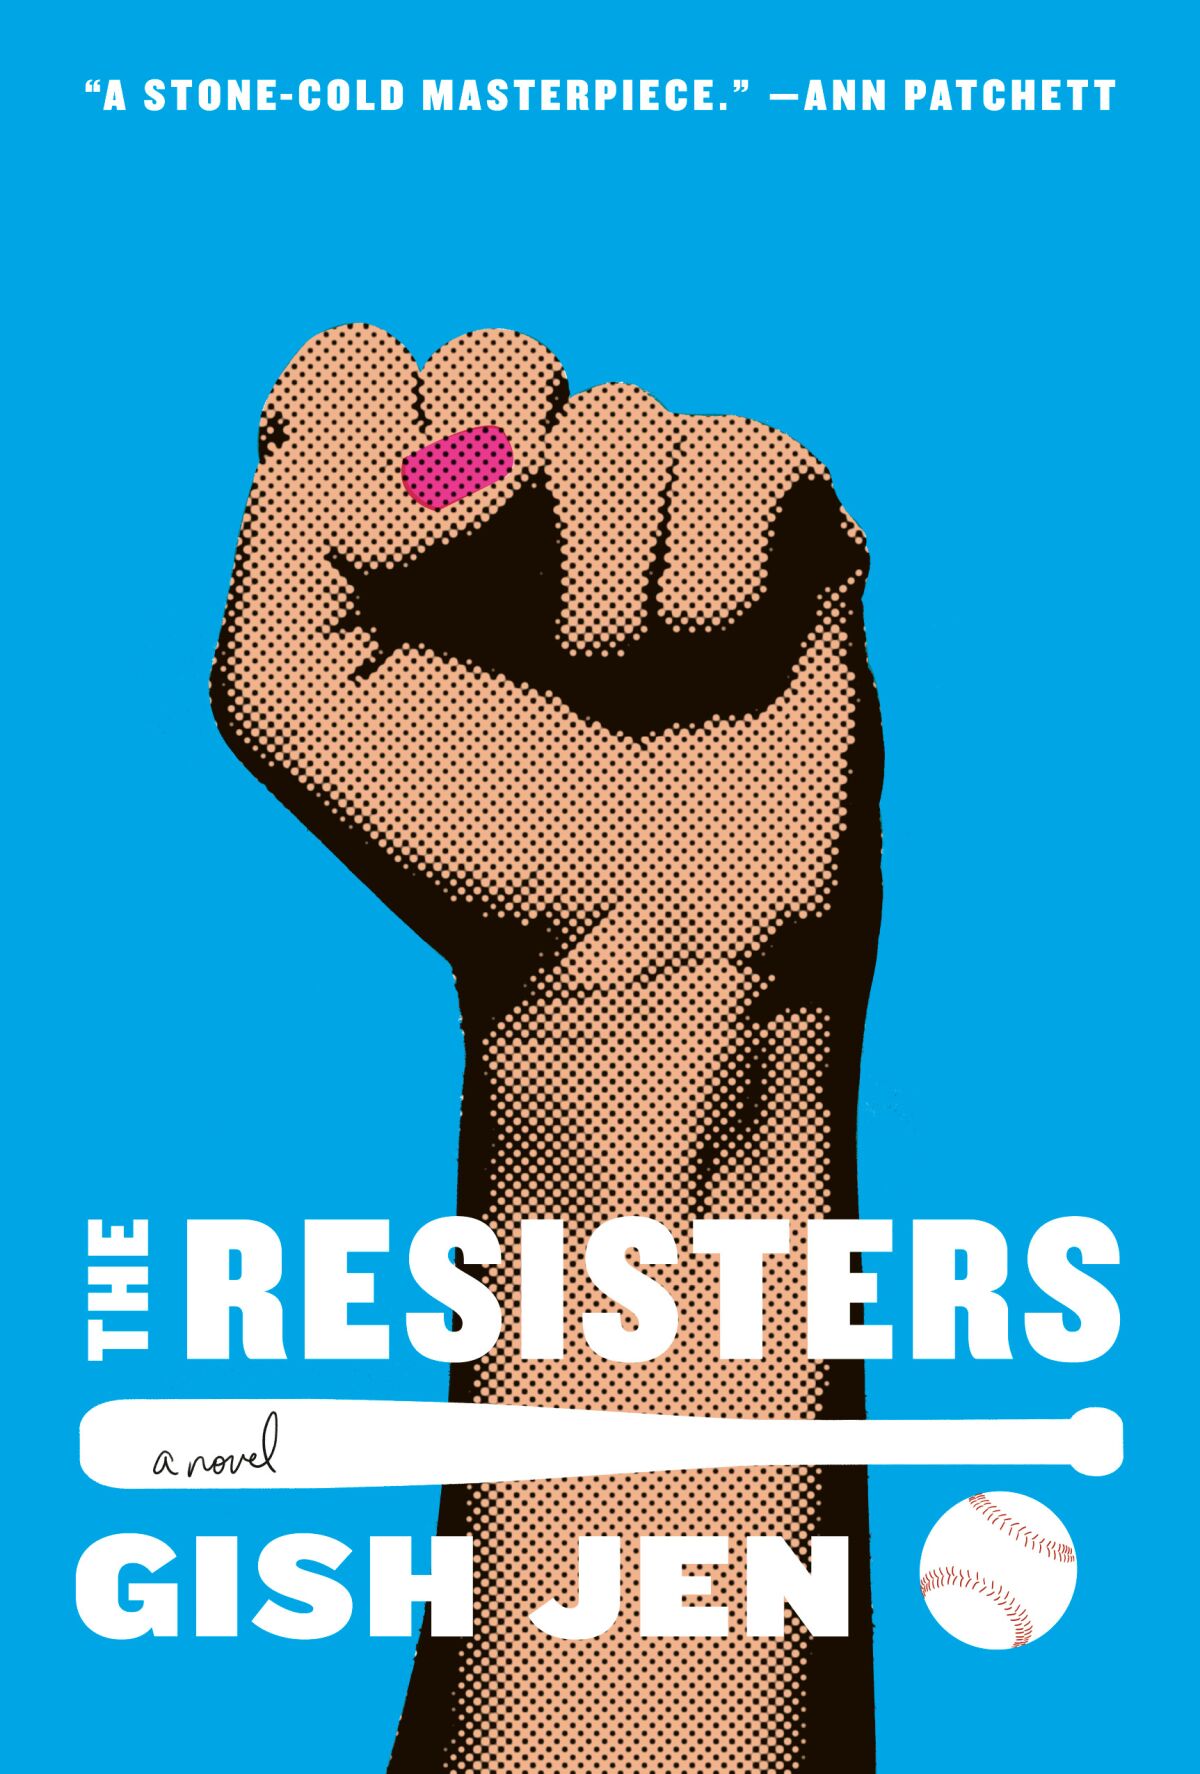 The book jacket for "The Resisters" by Gish Jen features a raised fist with pink nail polish, a baseball and a bat.